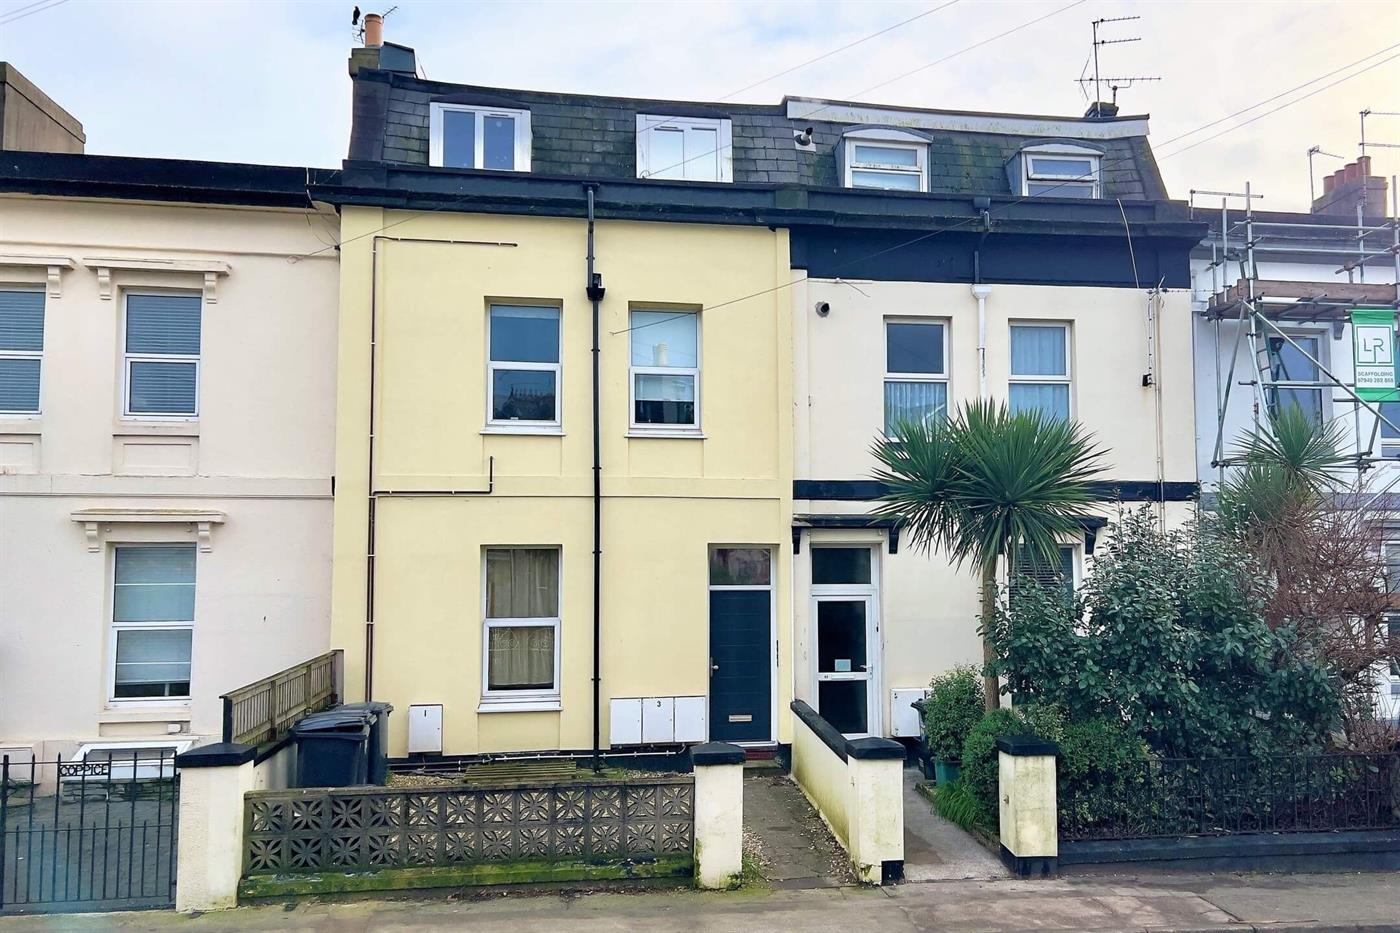 1 Bedroom Apartment to Rent (Let): Flat ,  St. Marychurch Road, Torquay, TQ1 3HG